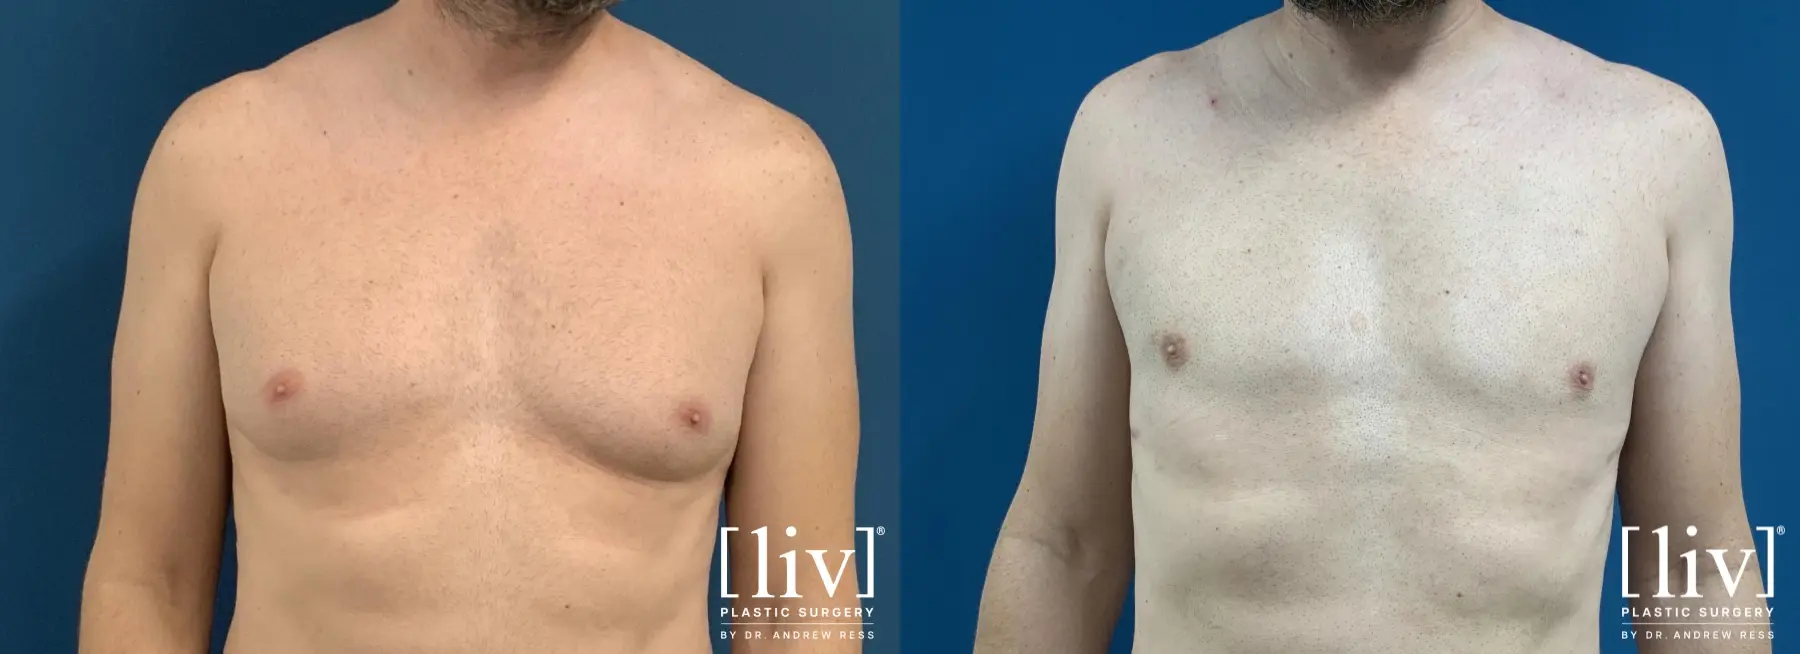 Gynecomastia: Patient 6 - Before and After 1